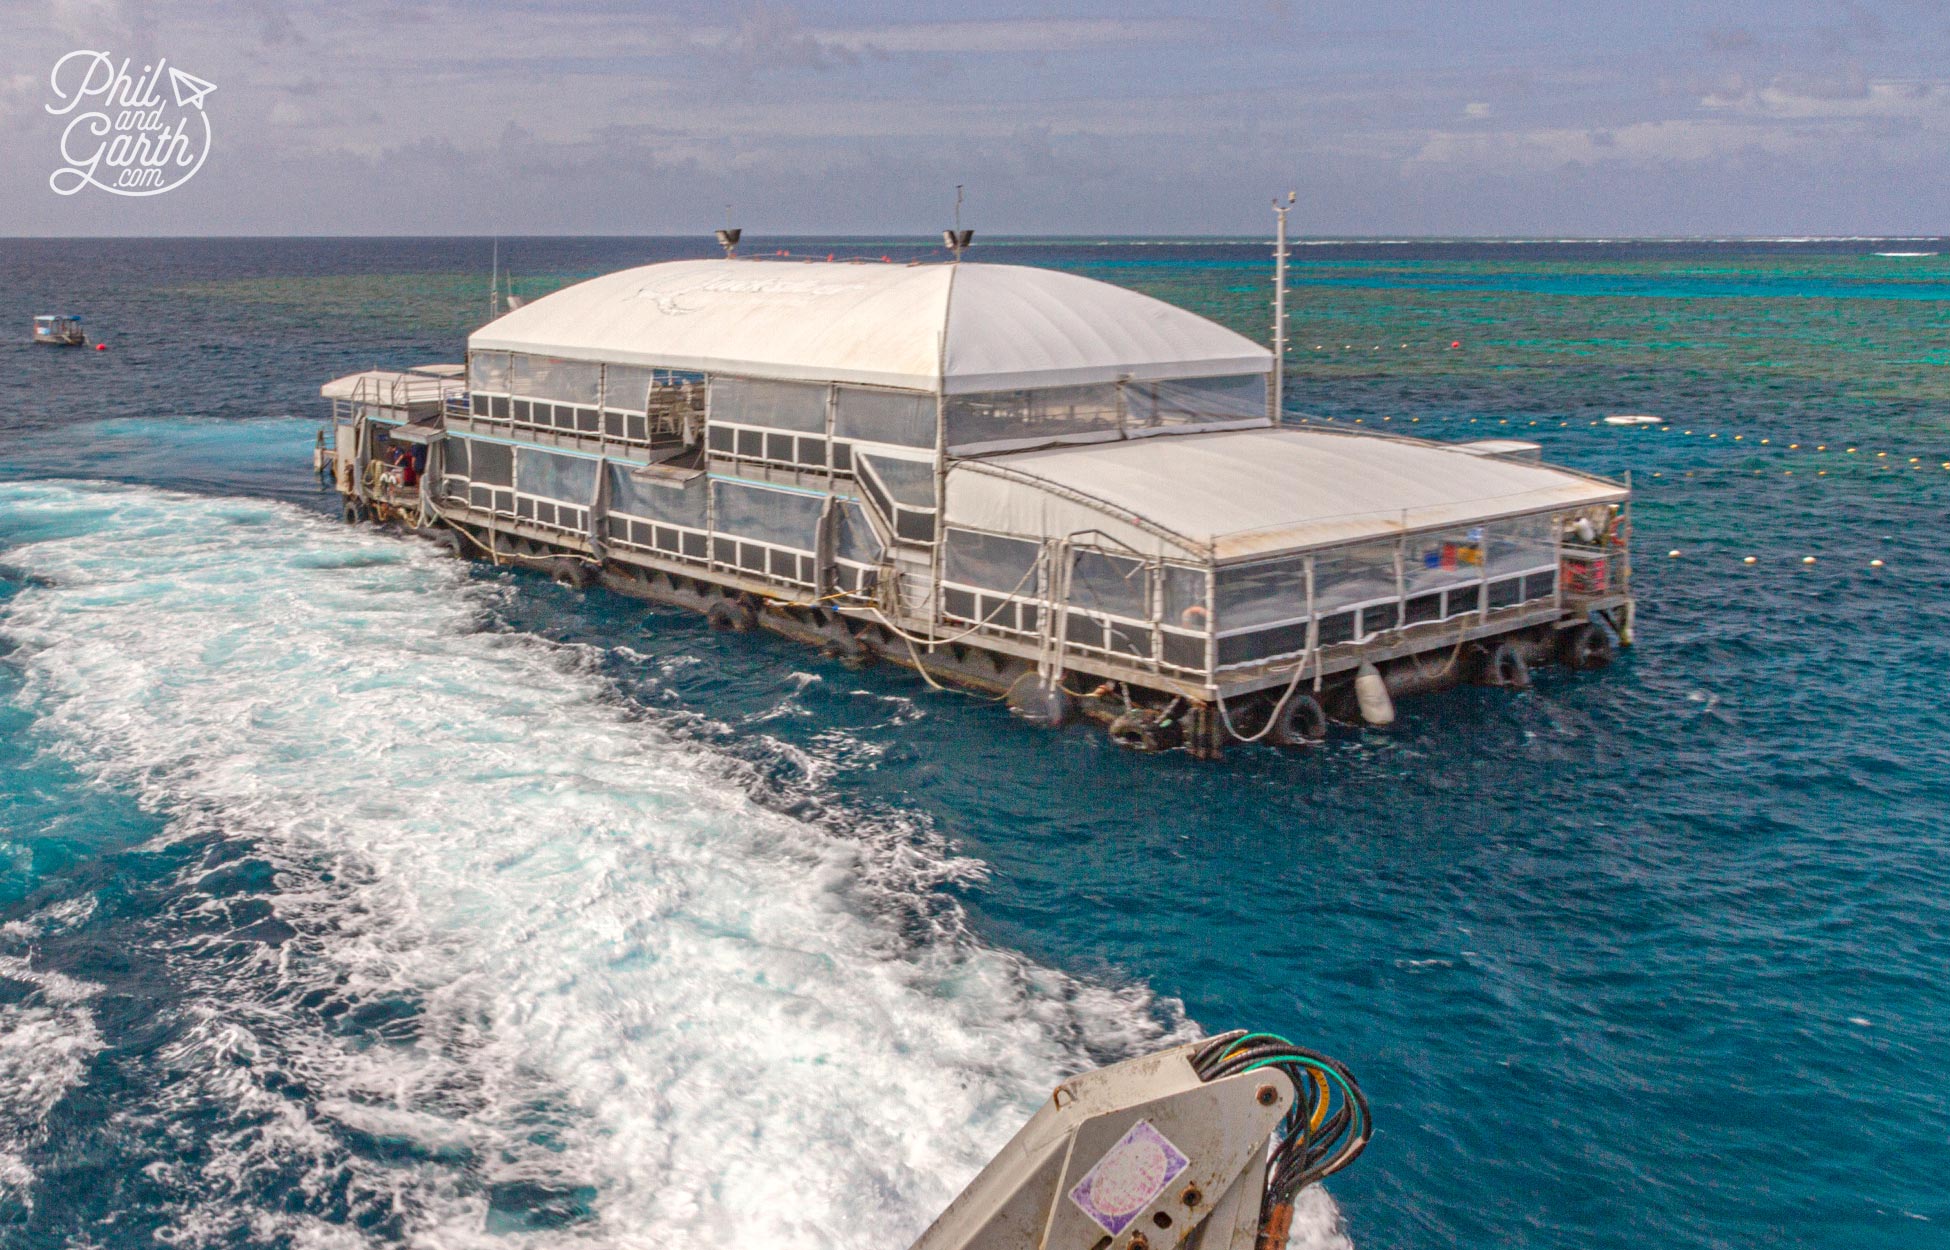 Arriving at Quicksilver's moored platform at the Agincourt Reef of the Great Barrier Reef